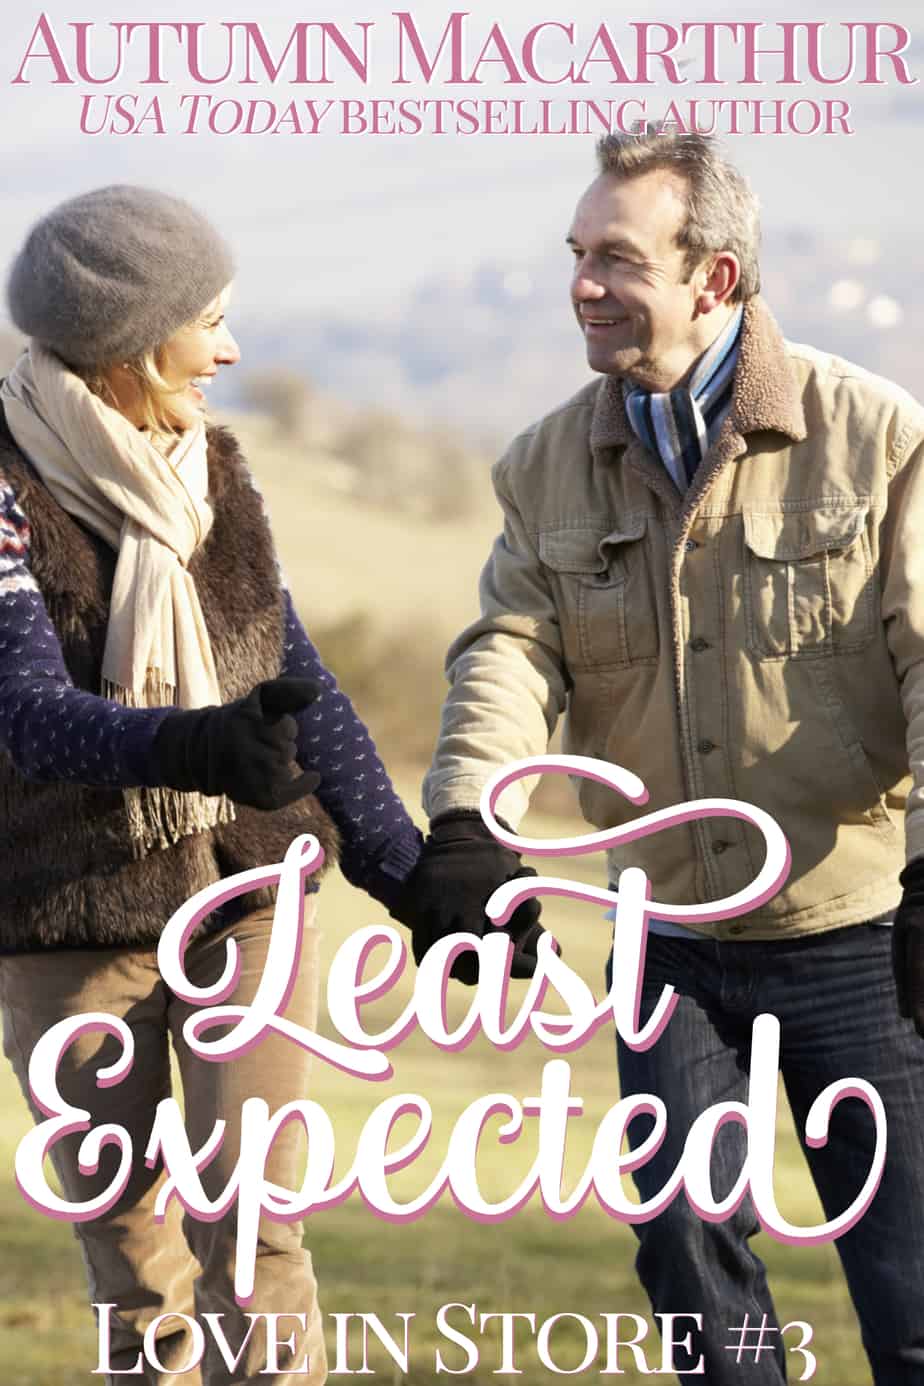 Cover image for London Christmas older couple midlife sweet inspirational romance Least Expected by Autumn Macarthur